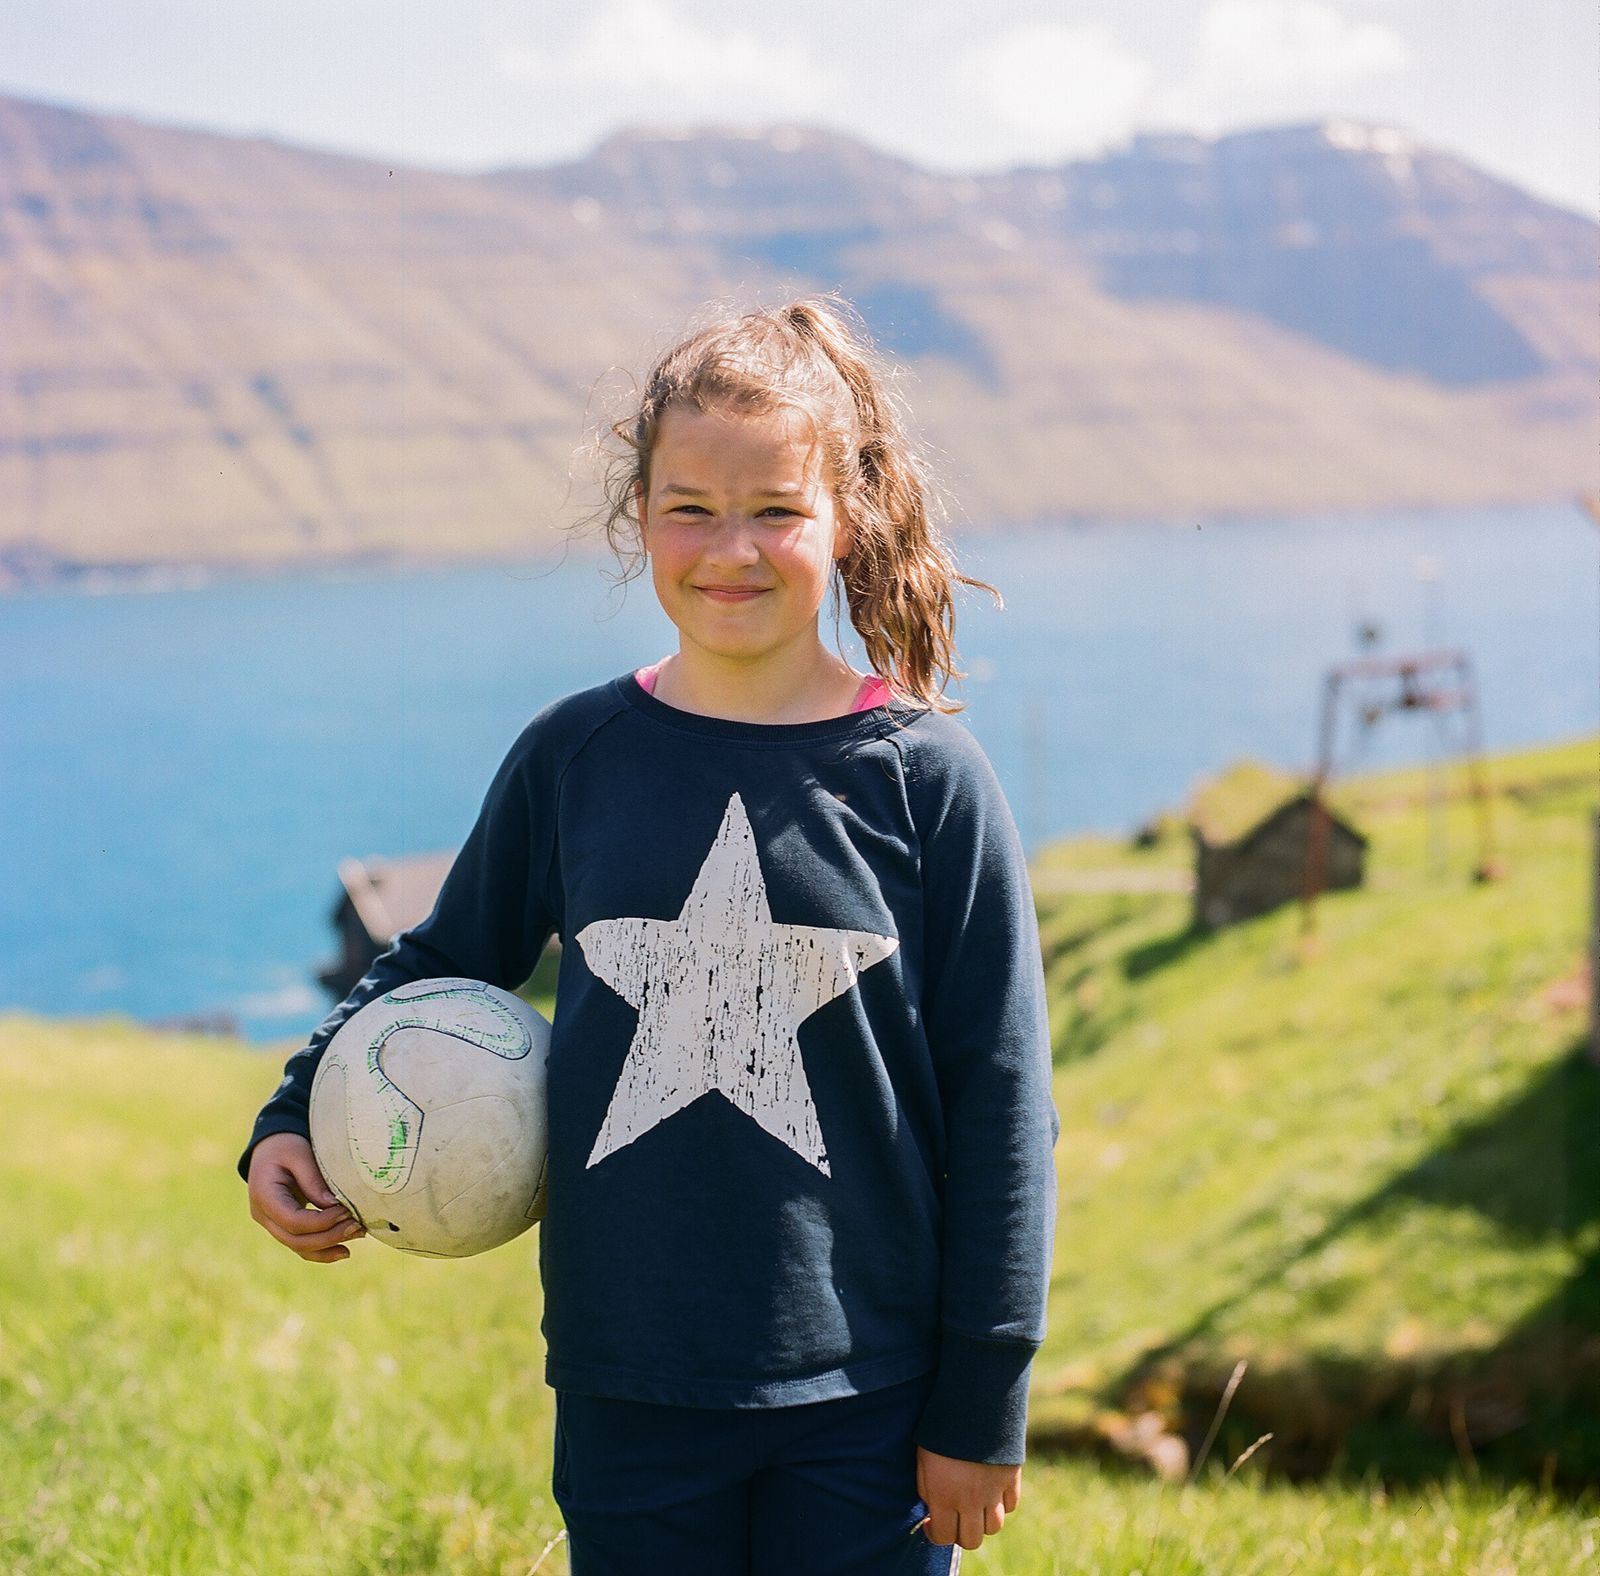 © Silvia Varela - Portrait of a Faroese girl on a school outing at Mikladur, on the Faroese island of Kalsoy.